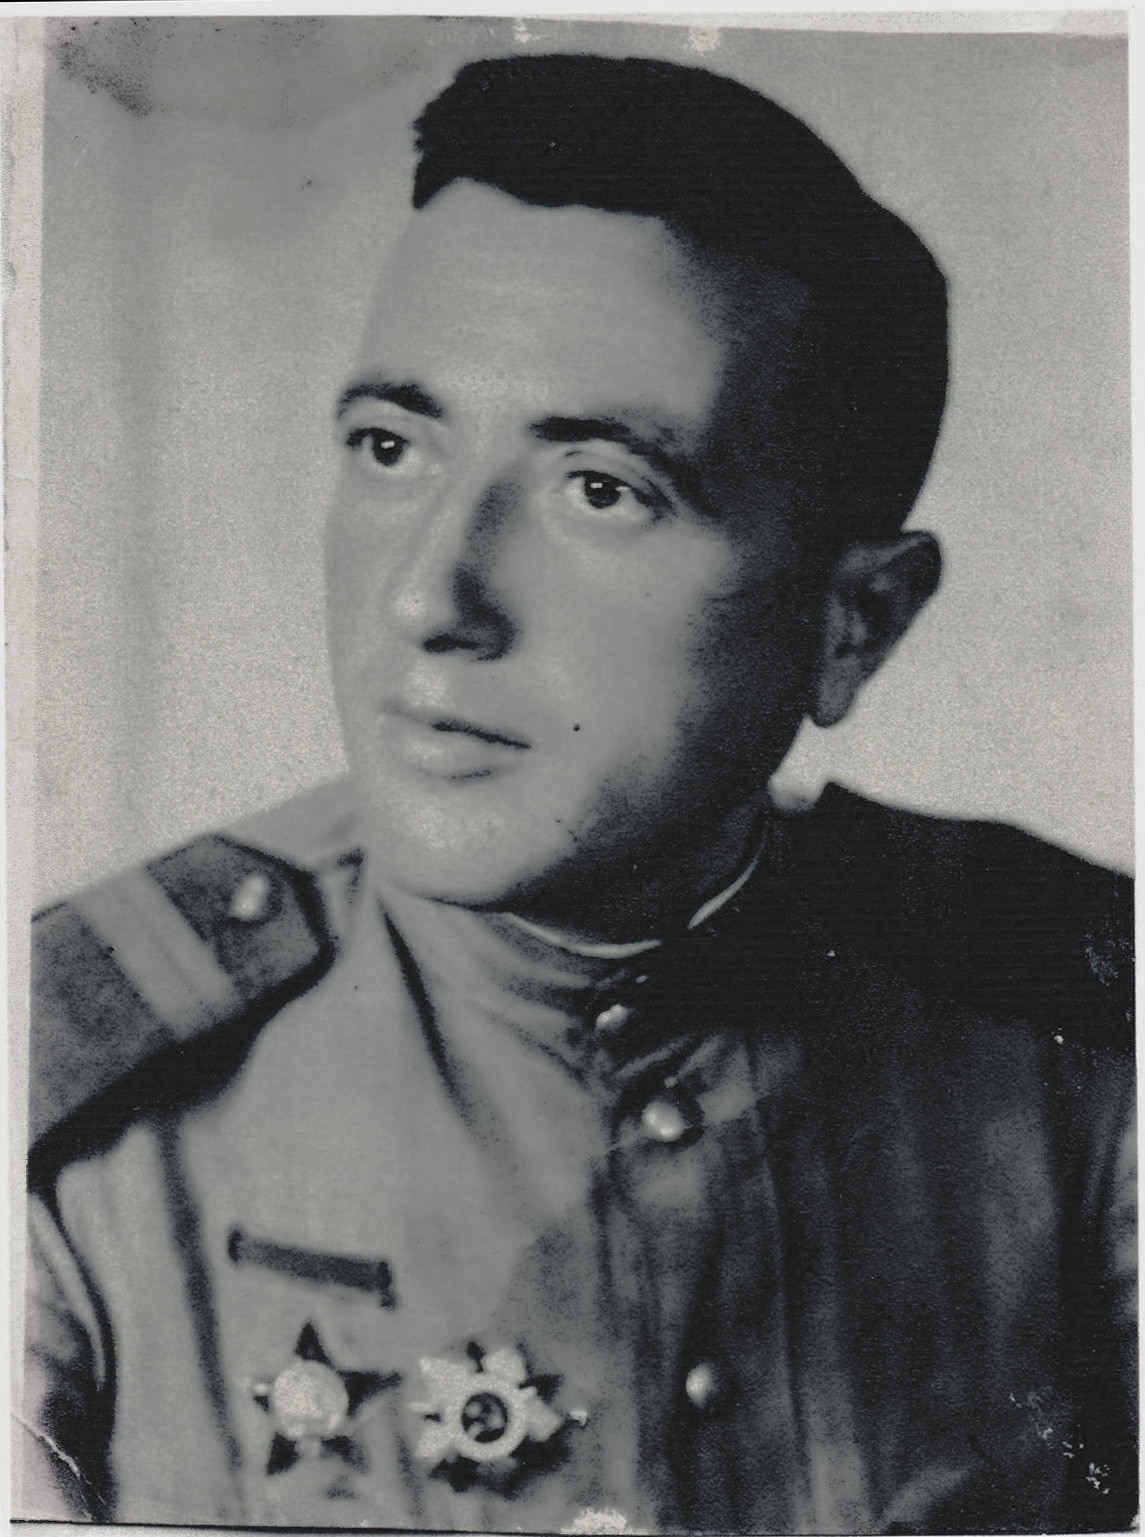 Portrait of David Fiszman as a soldier in the Red Army.